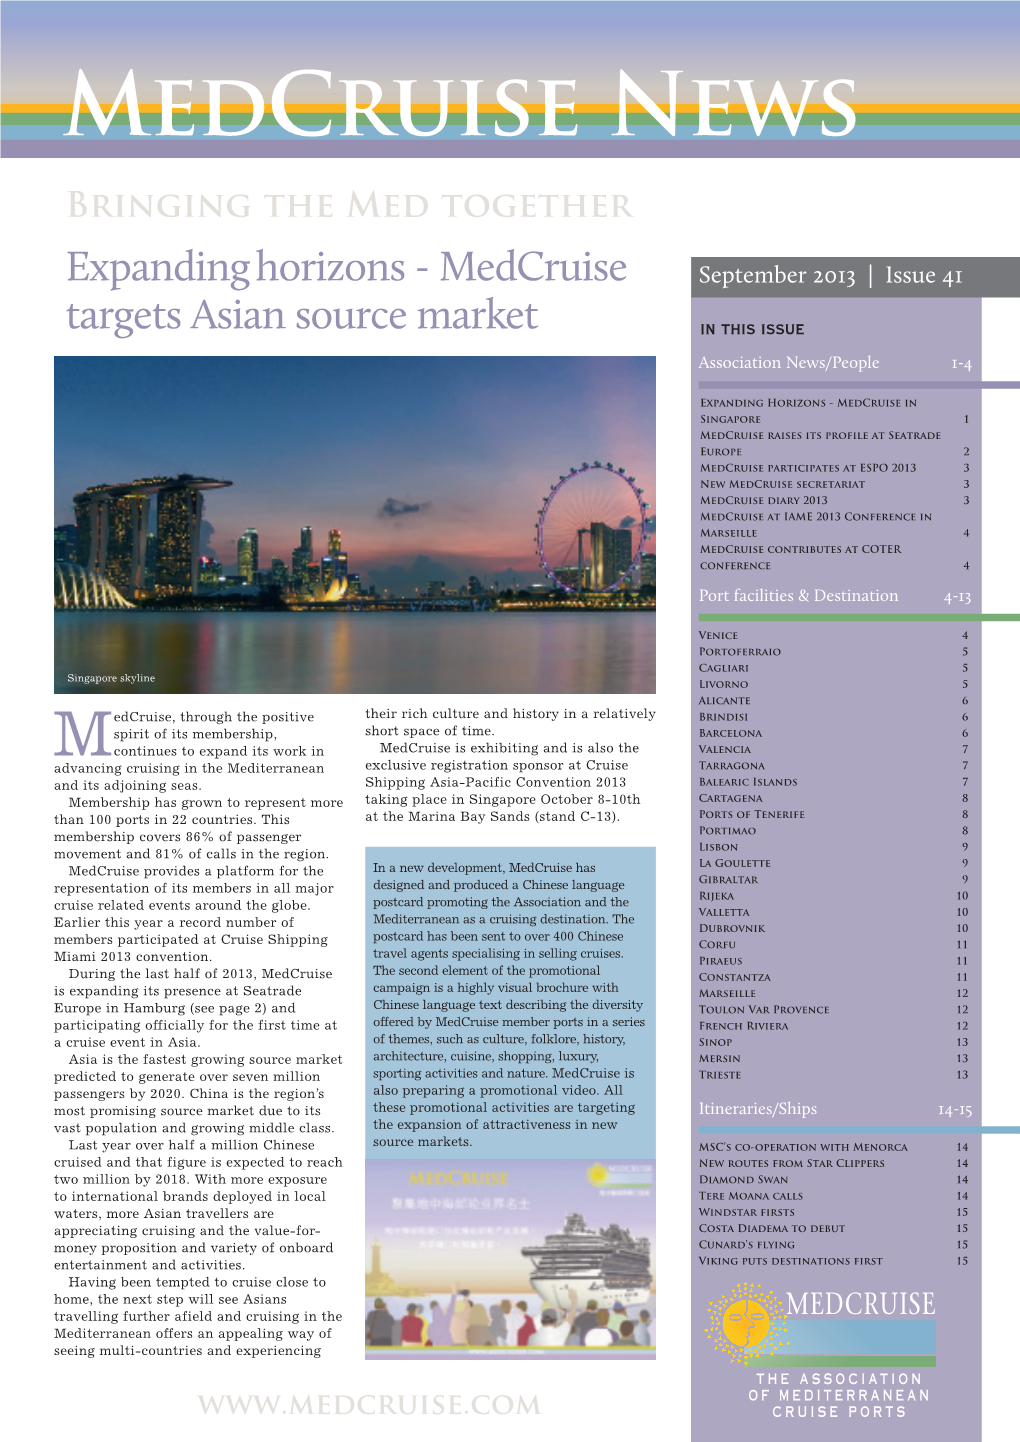 MEDCRUISE Newsletter Issue 41 Sept 13 06/09/2013 14:46 Page 1 Medcruise News